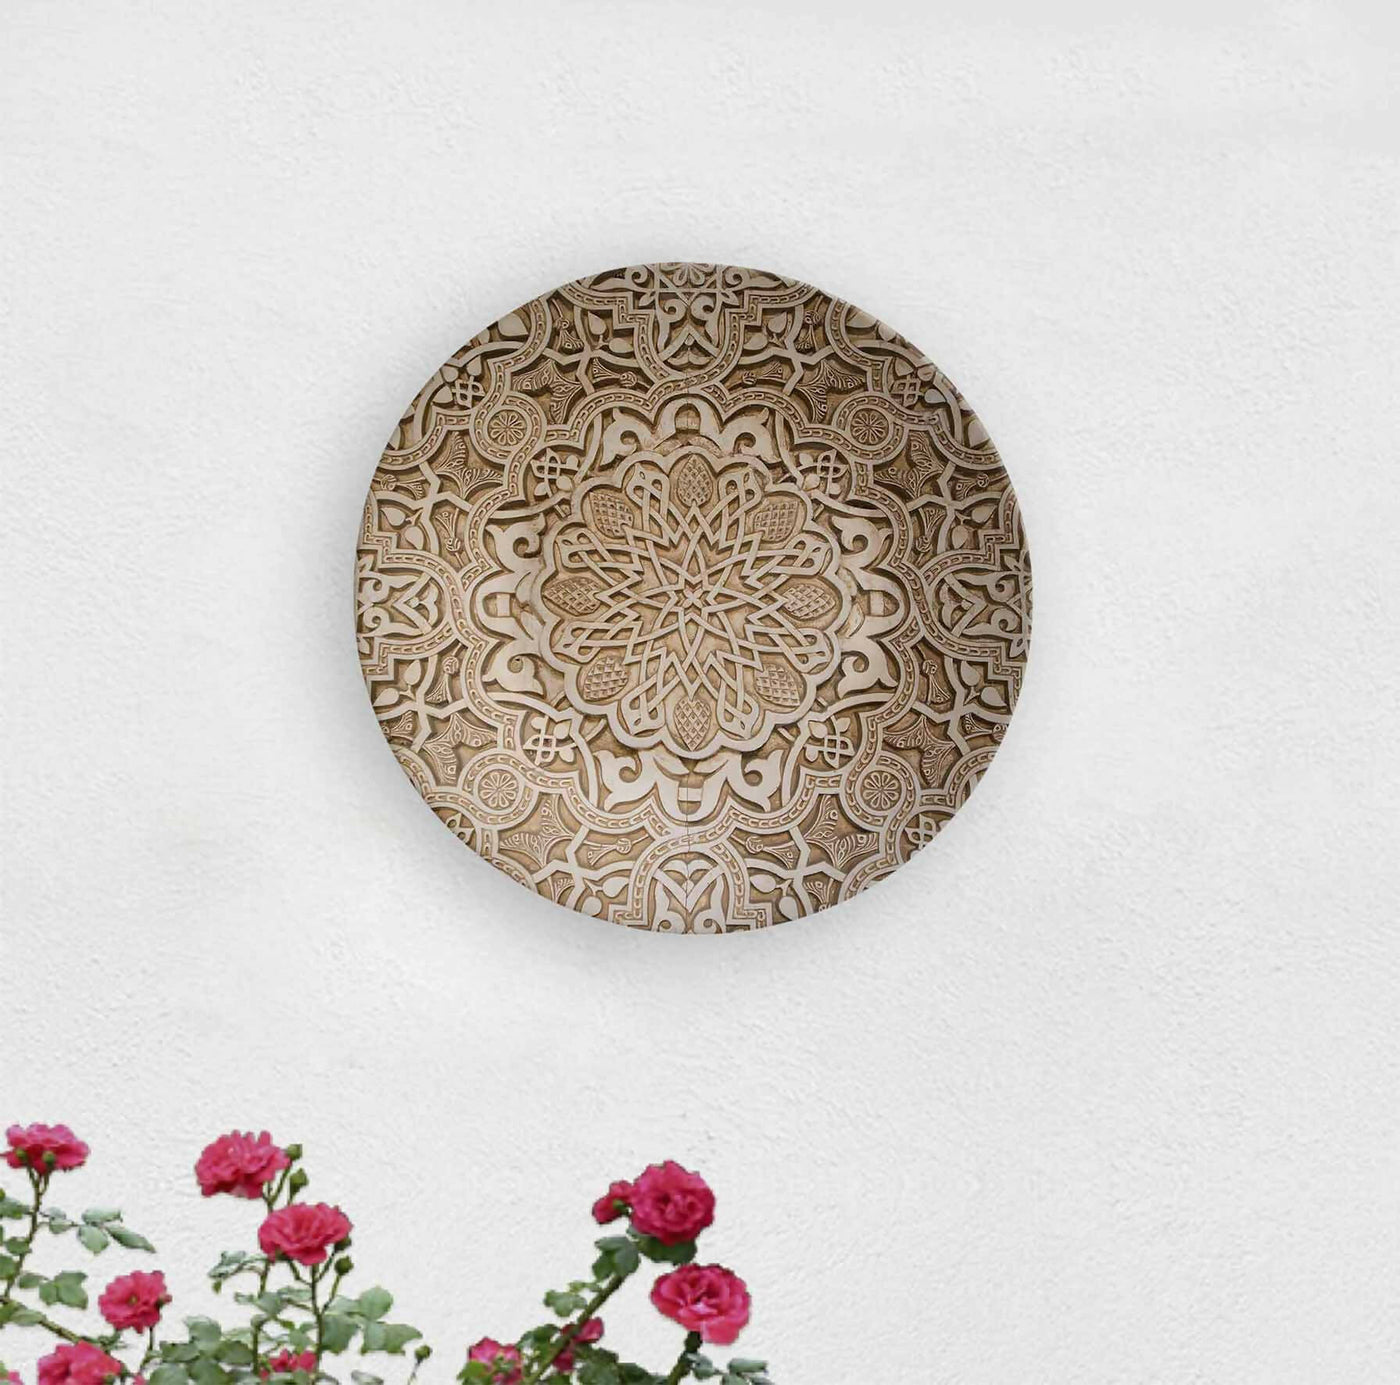 History Within Decorative Wall Plate - Wall Decor - 1